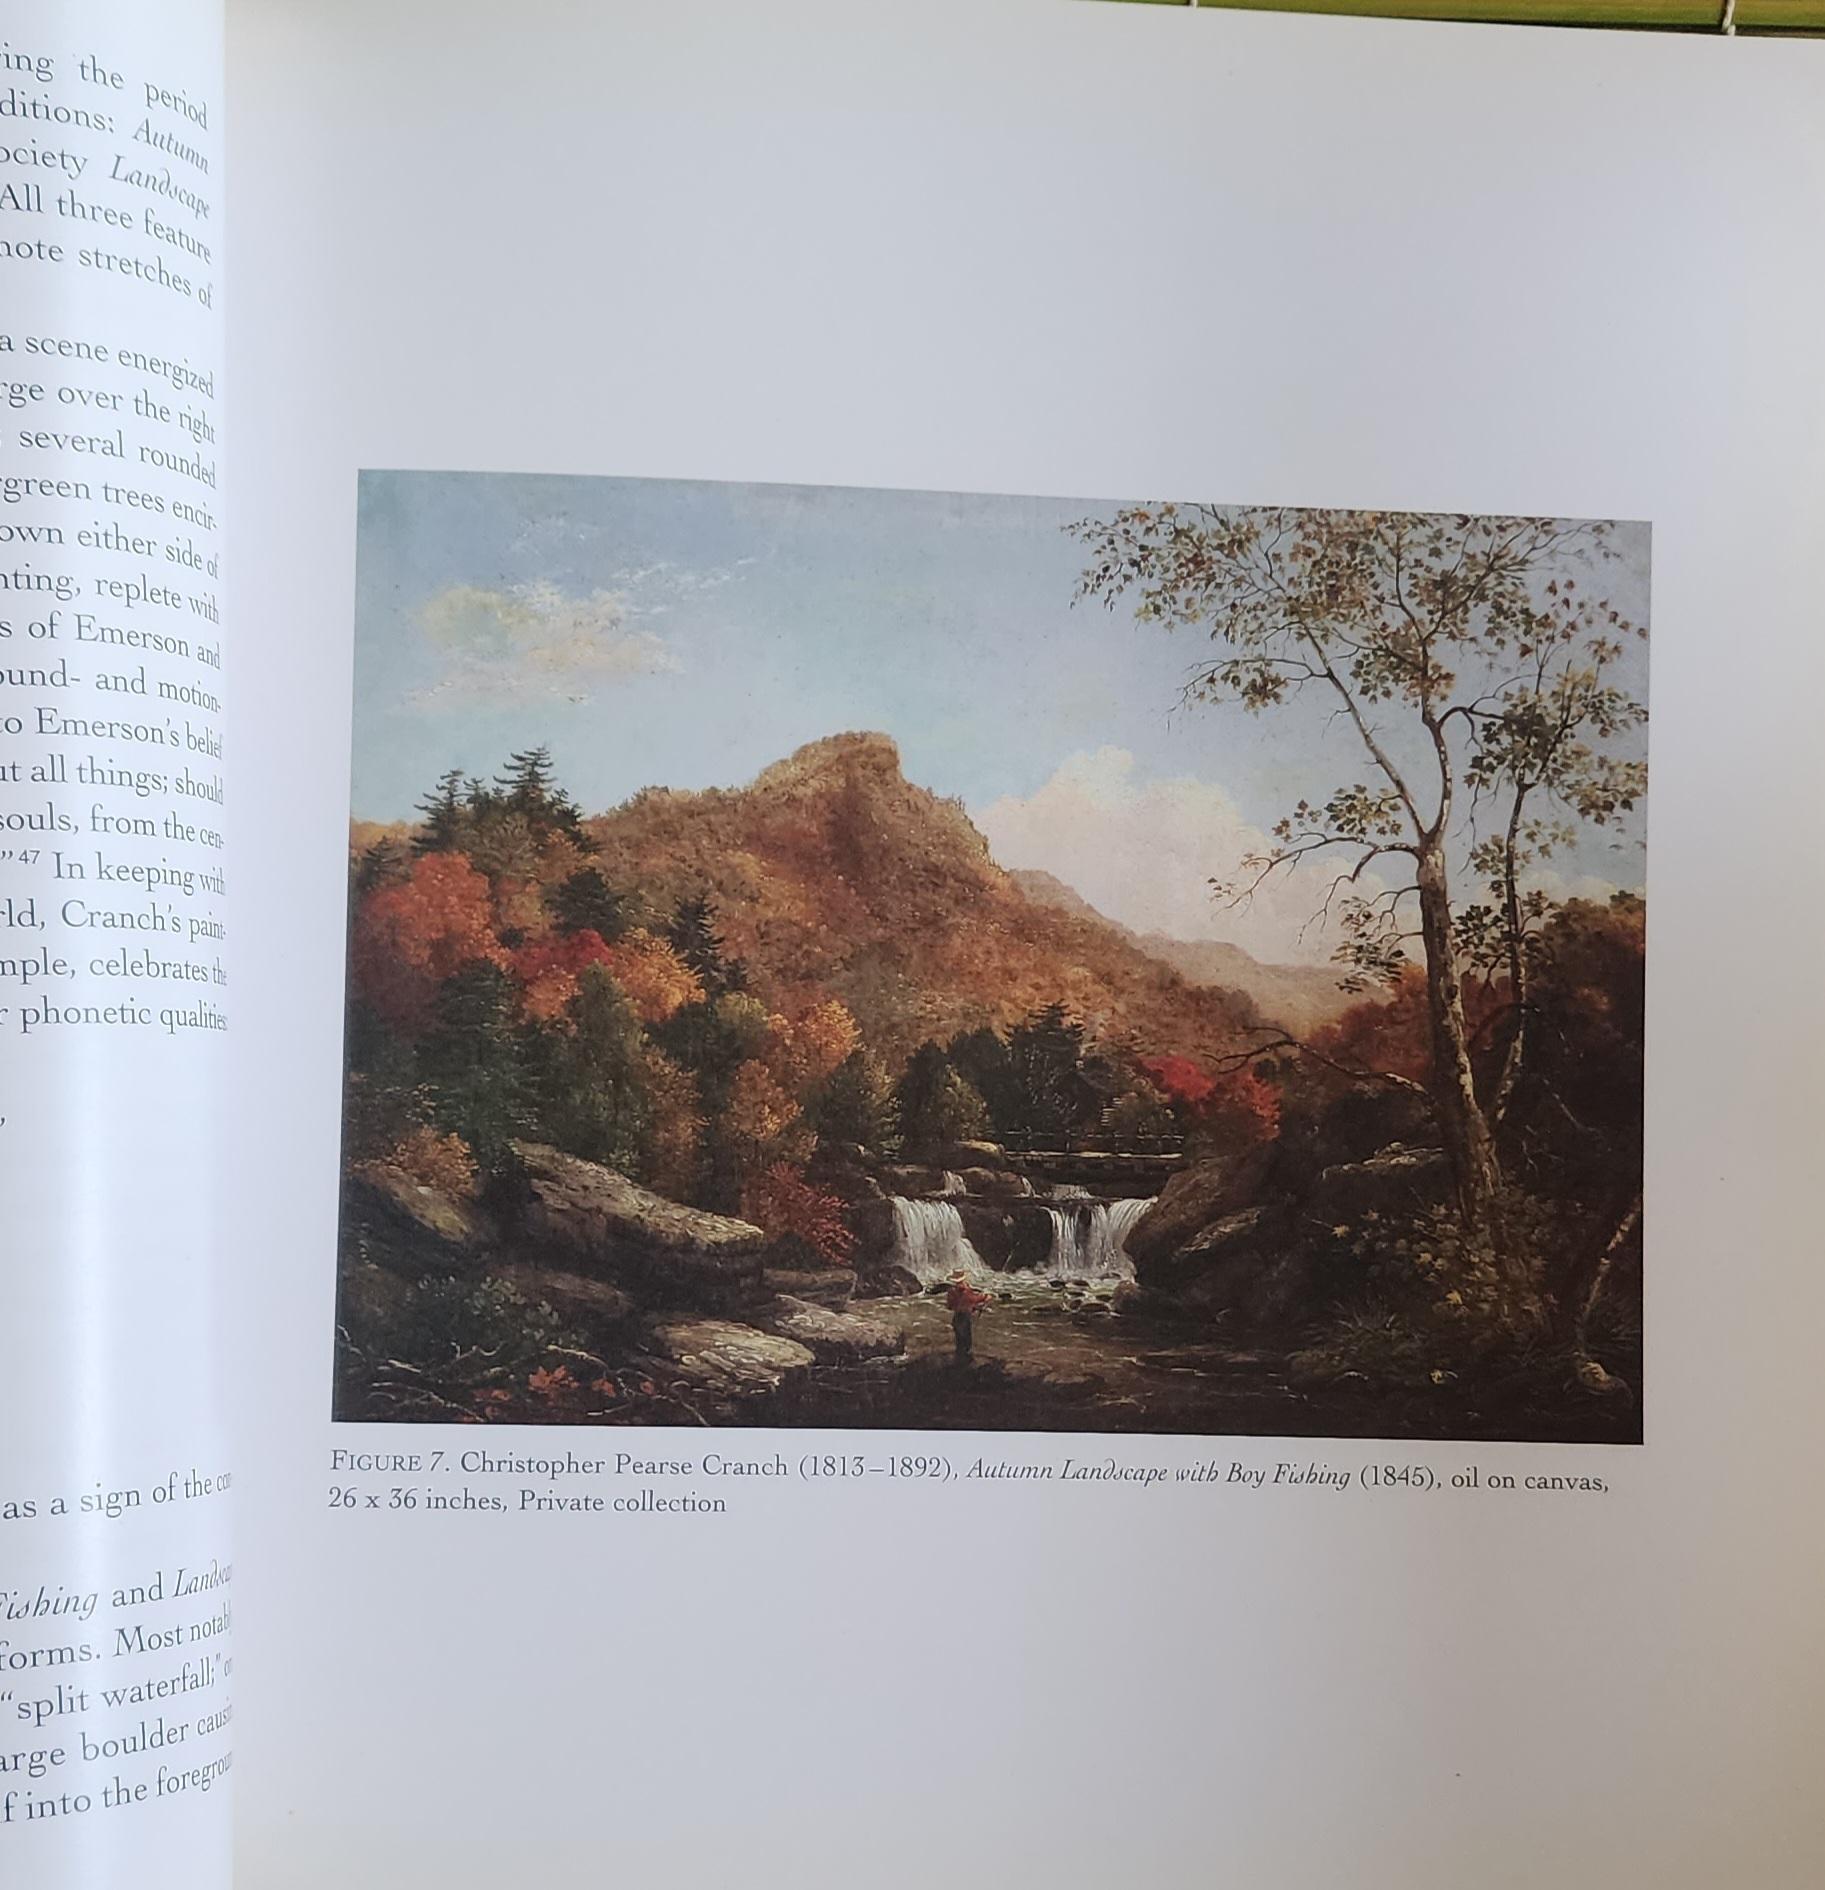 Signed lower right.

This painting was exhibited in the Christopher Pearse Cranch landscape exhibition in 2007 at the Lyman Allyn Art Museum and published and illustrated in the catalog.

Bio:
Christopher Pearse Cranch was a landscape, still life,